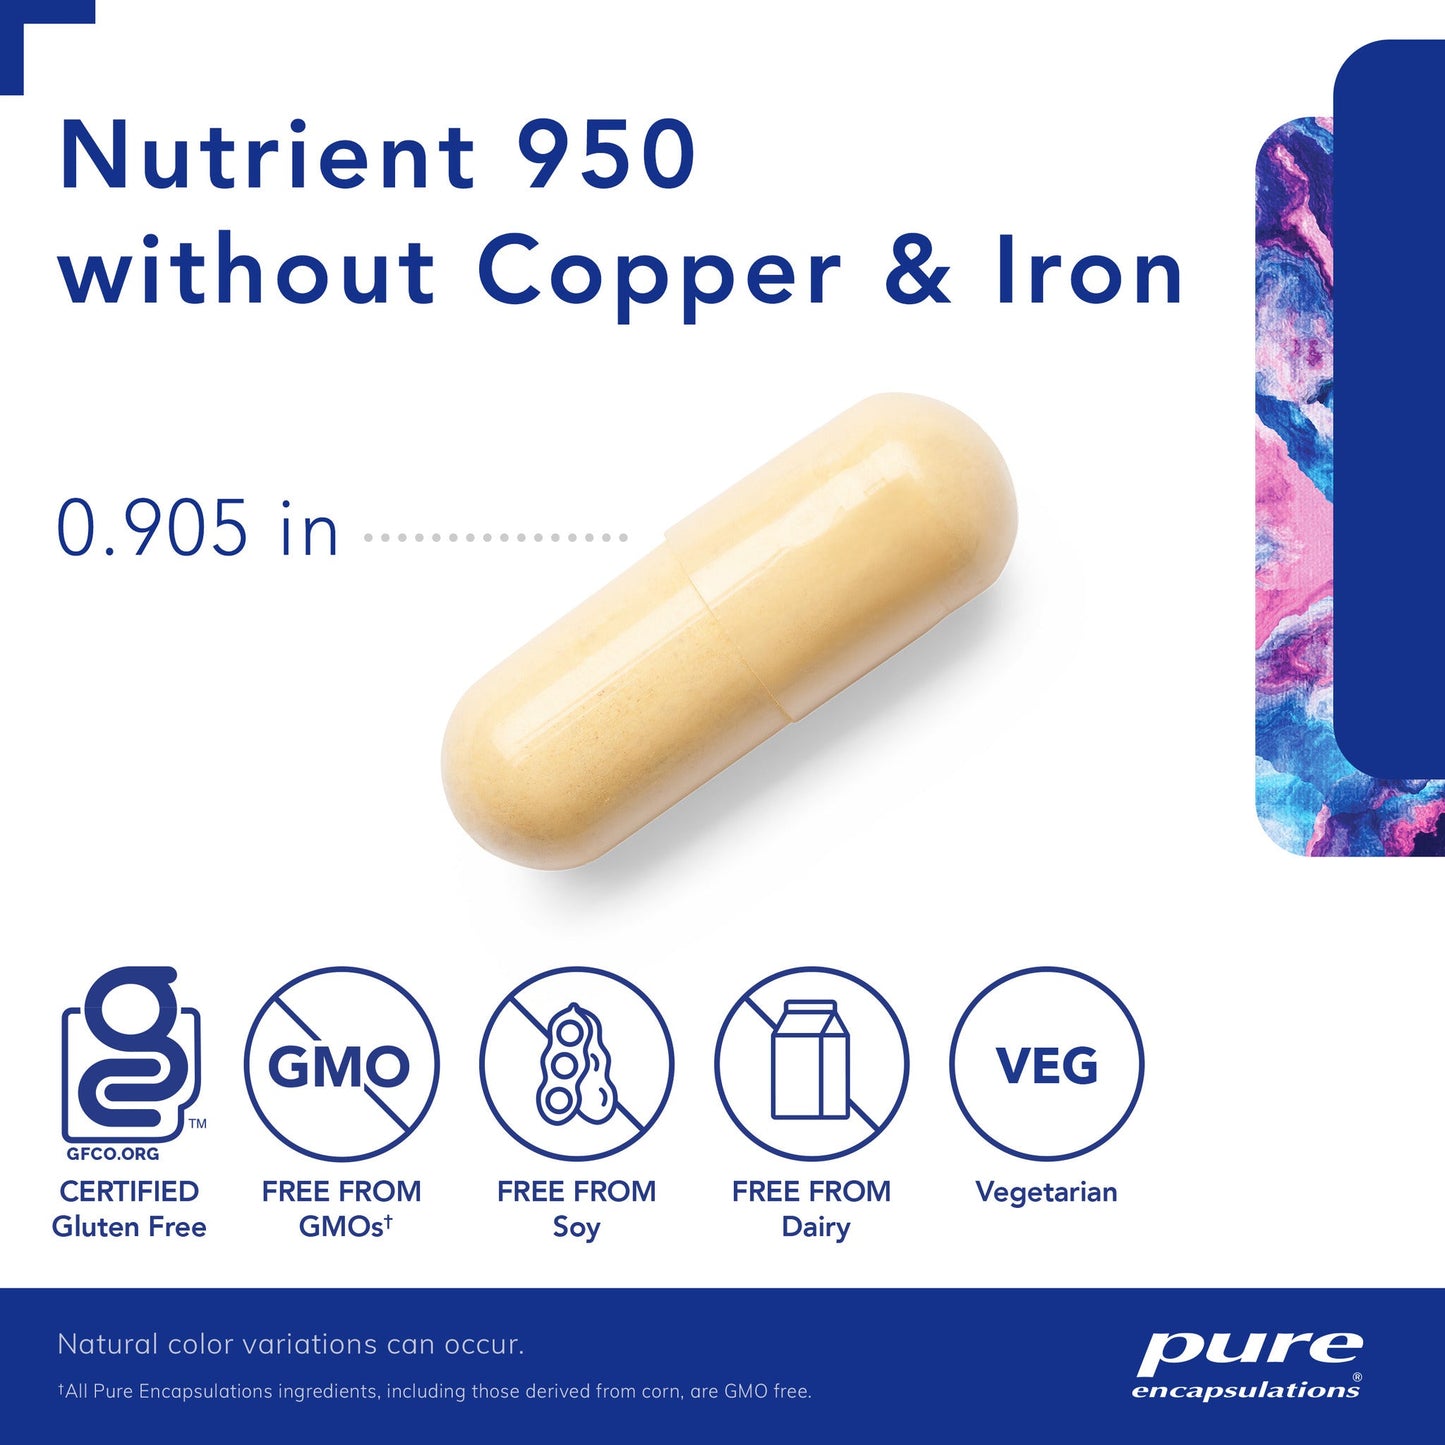 Nutrient 950® without Copper & Iron